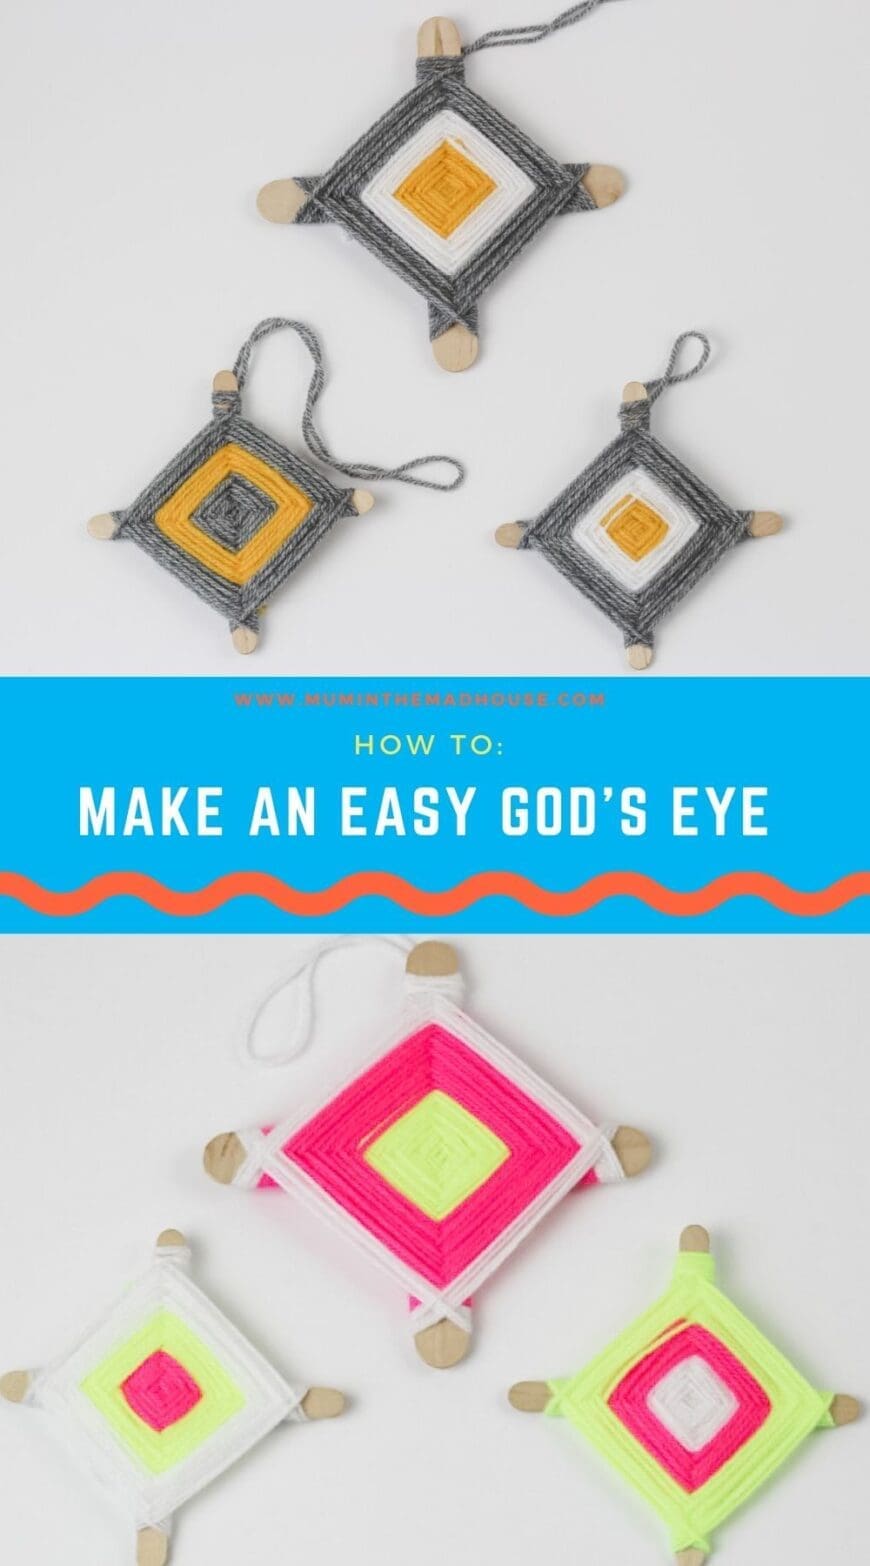 Kids can make this classic God's Eye craft with scraps of colourful yarn and 2 sticks. Great activity for strengthening fine motor skills